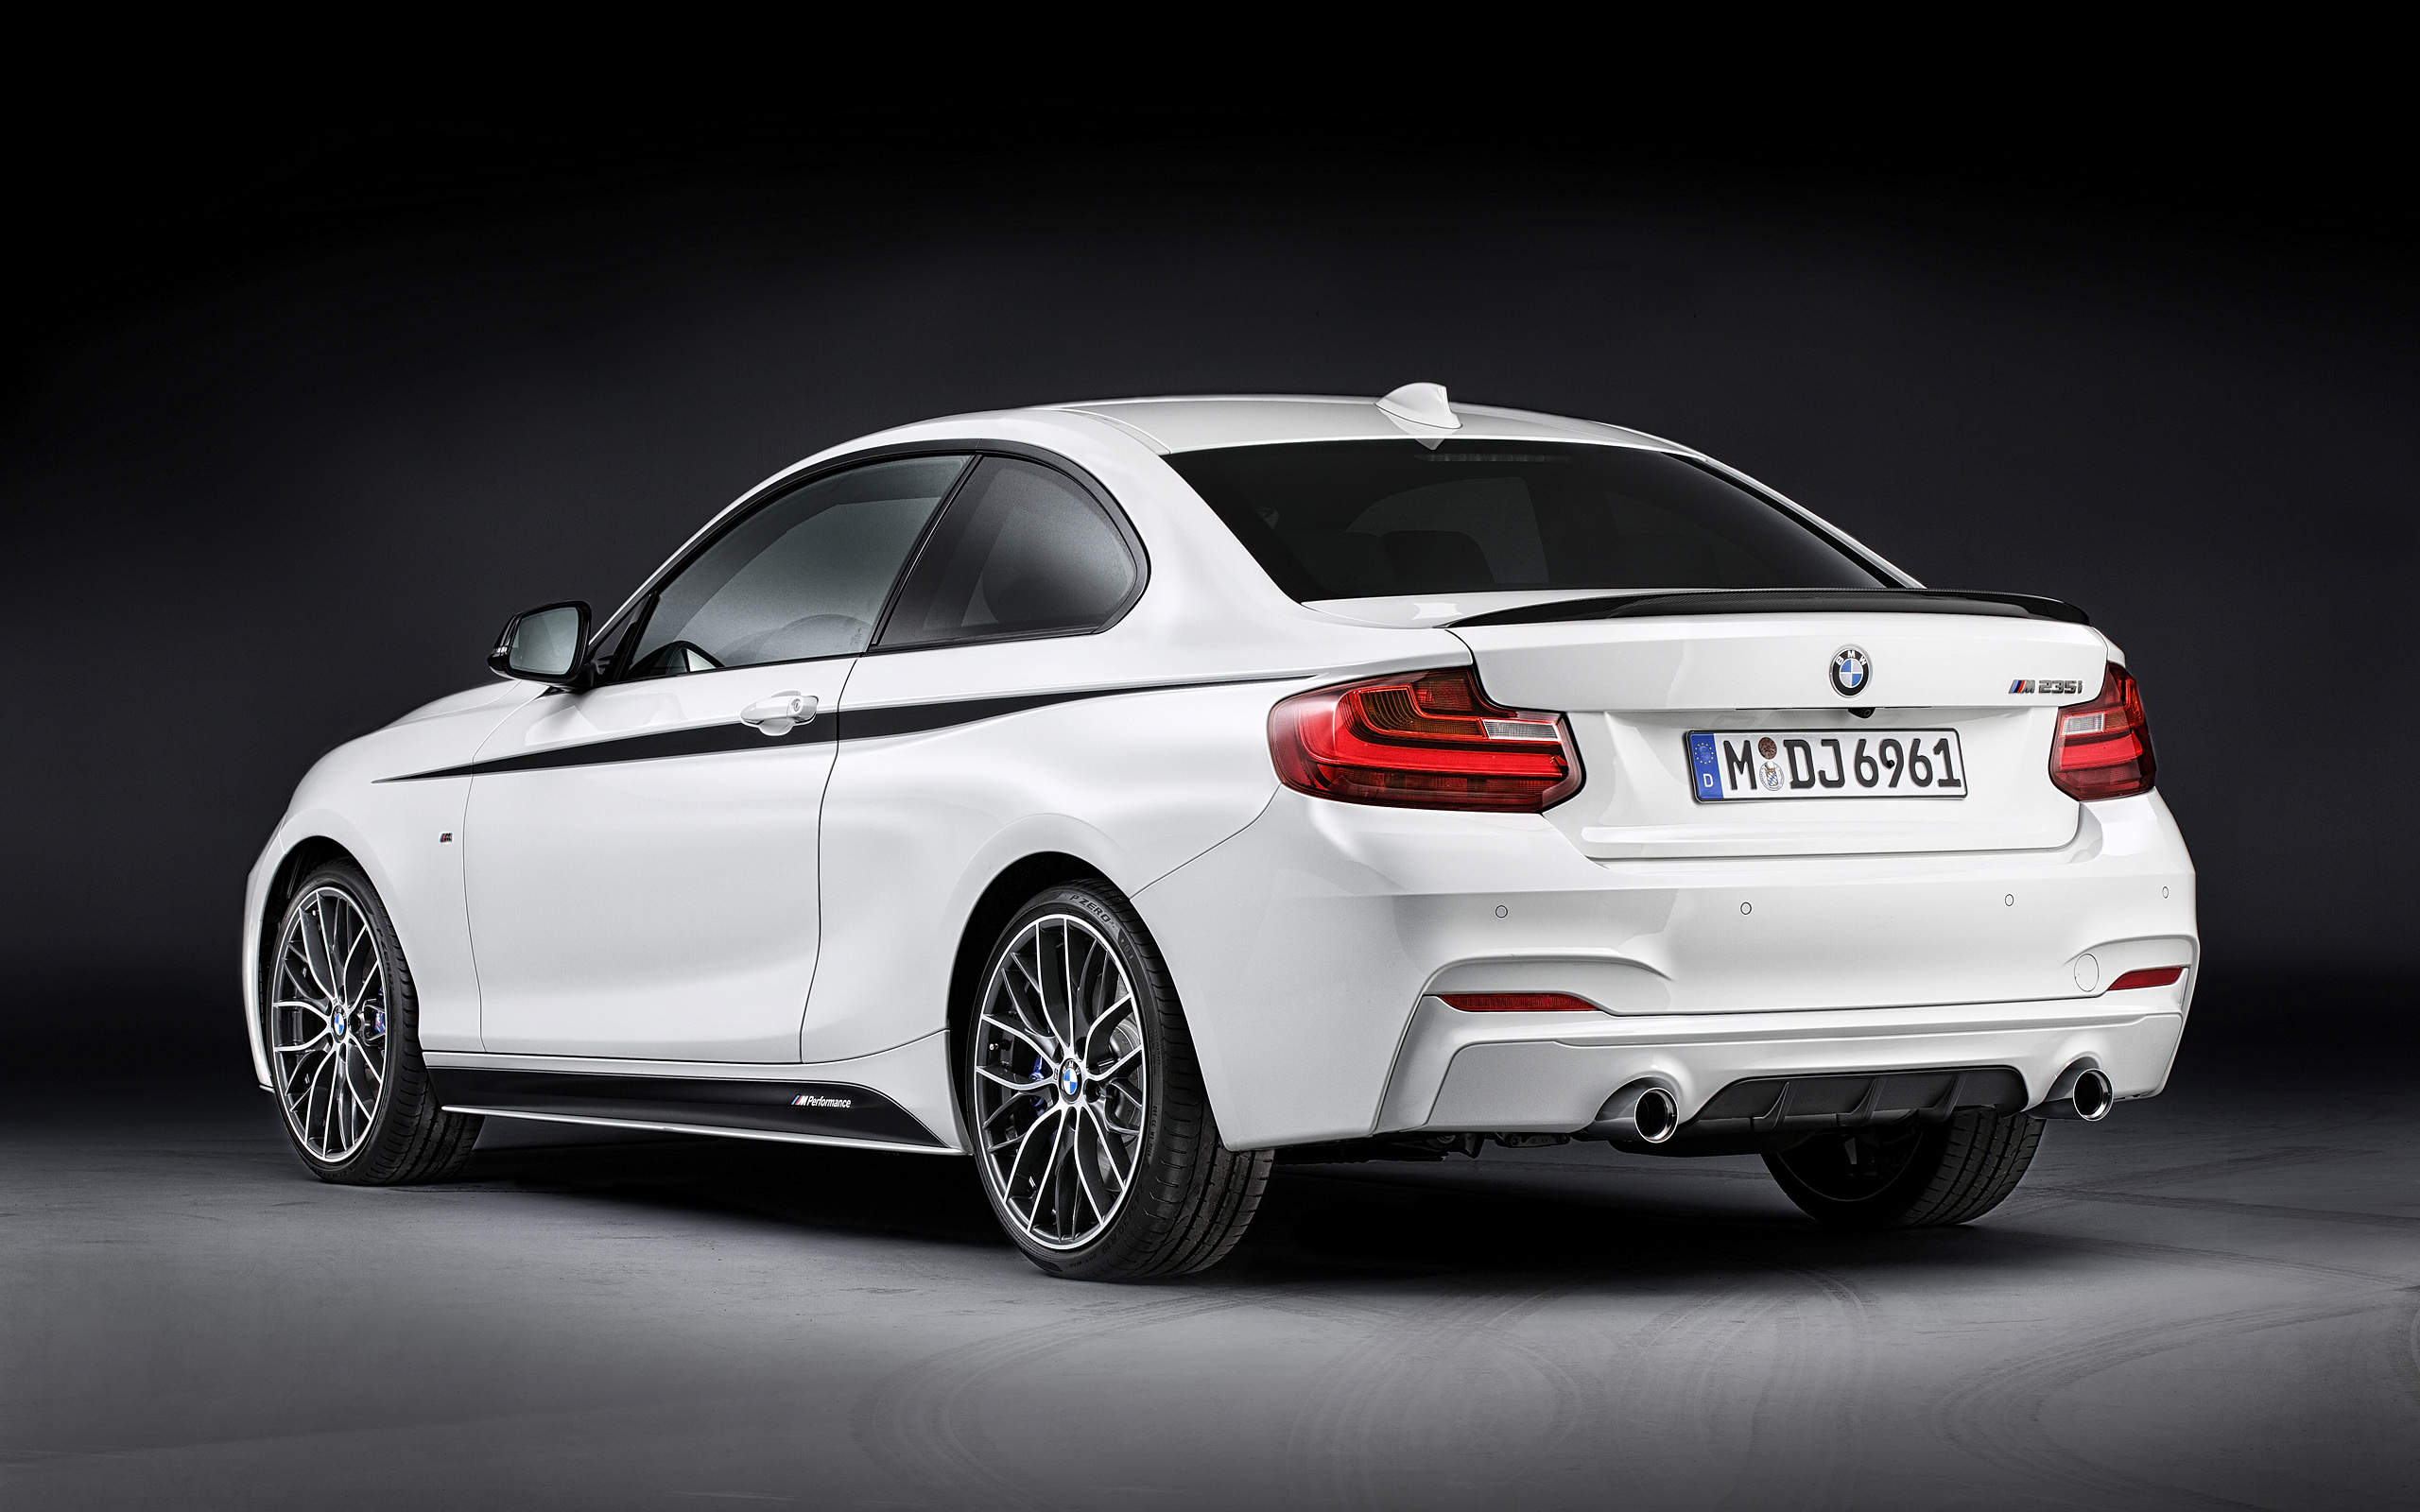  2014 BMW 2-Series Coupe M Performance Parts Wallpaper.